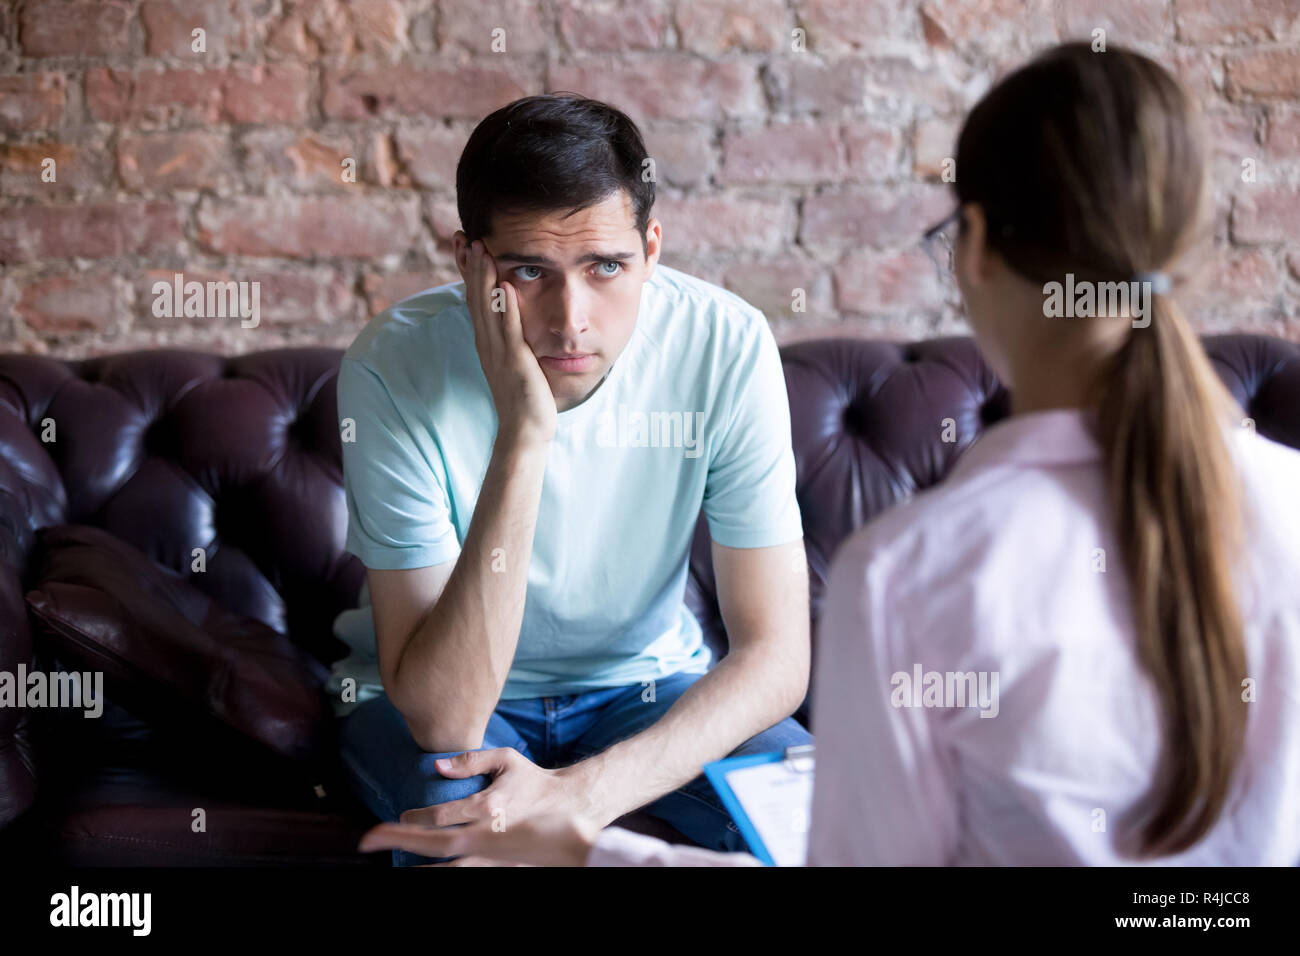 Unhappy male patient listening to a psychologist counselor. Stock Photo